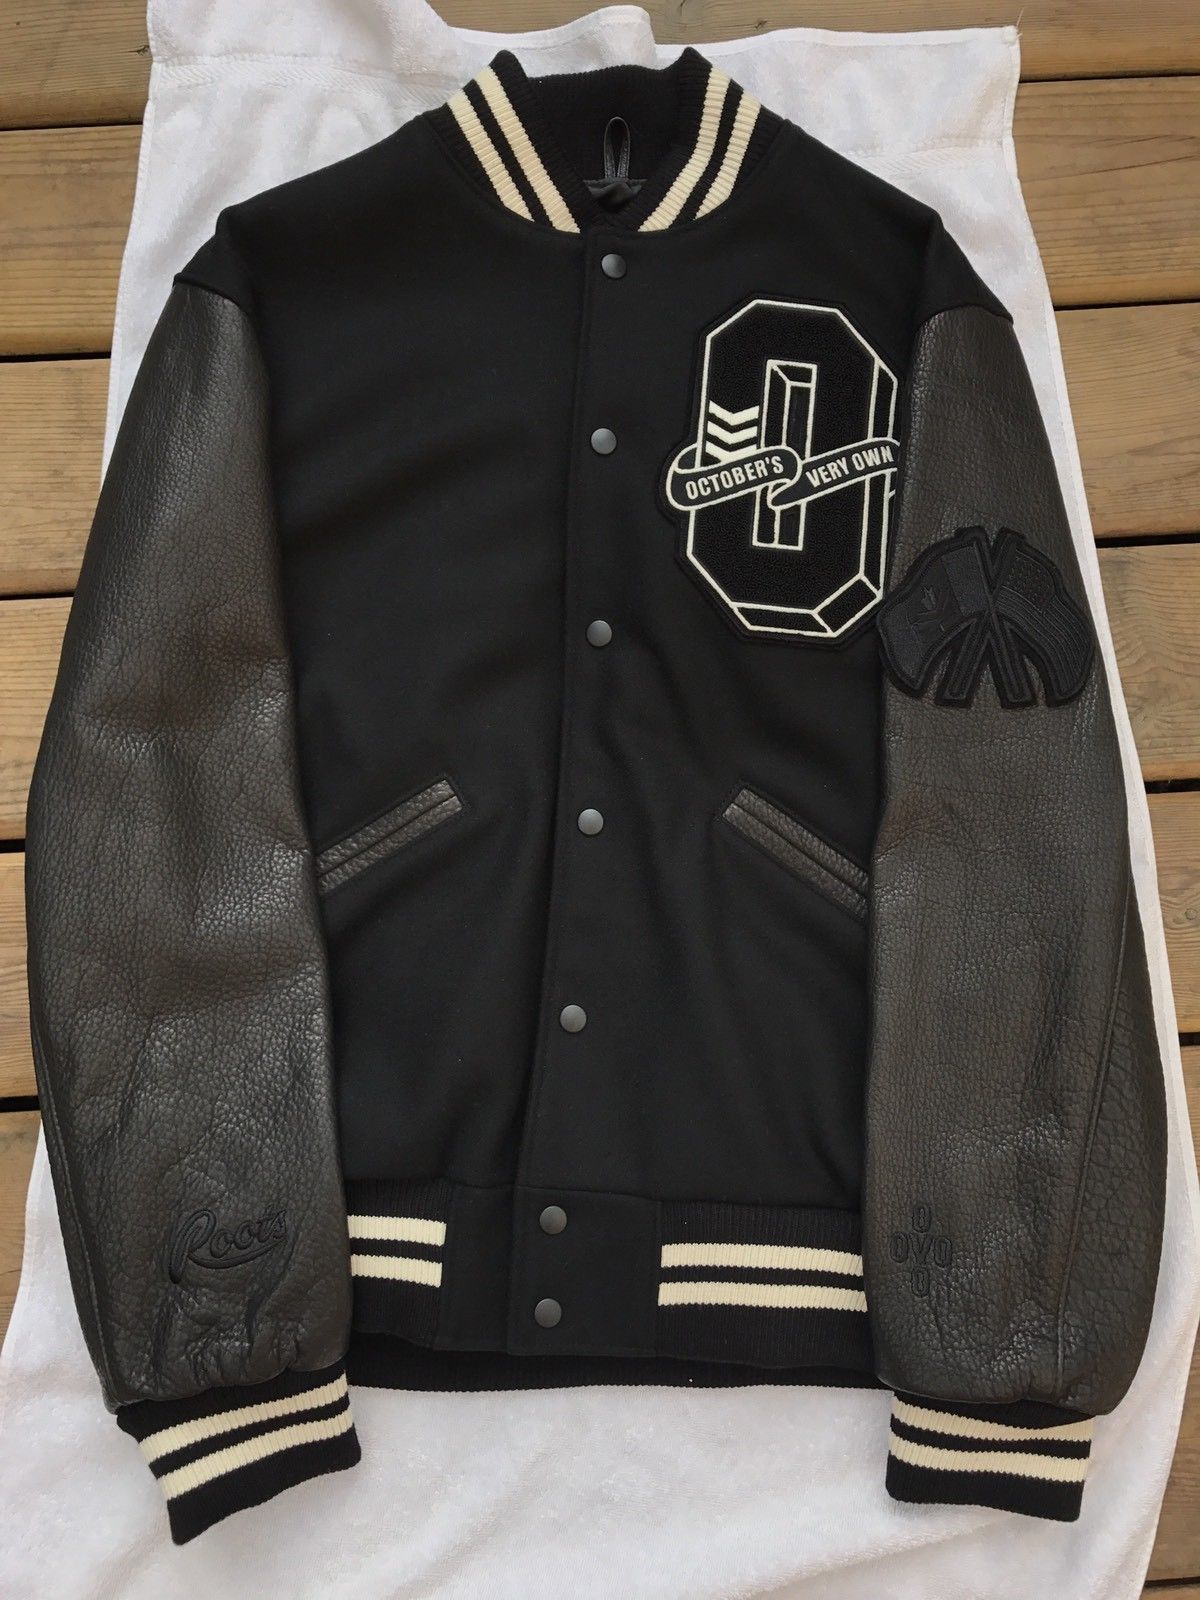 Octobers Very Own OVO x Roots Fall 2017 Black Cream Leather Varsity ...